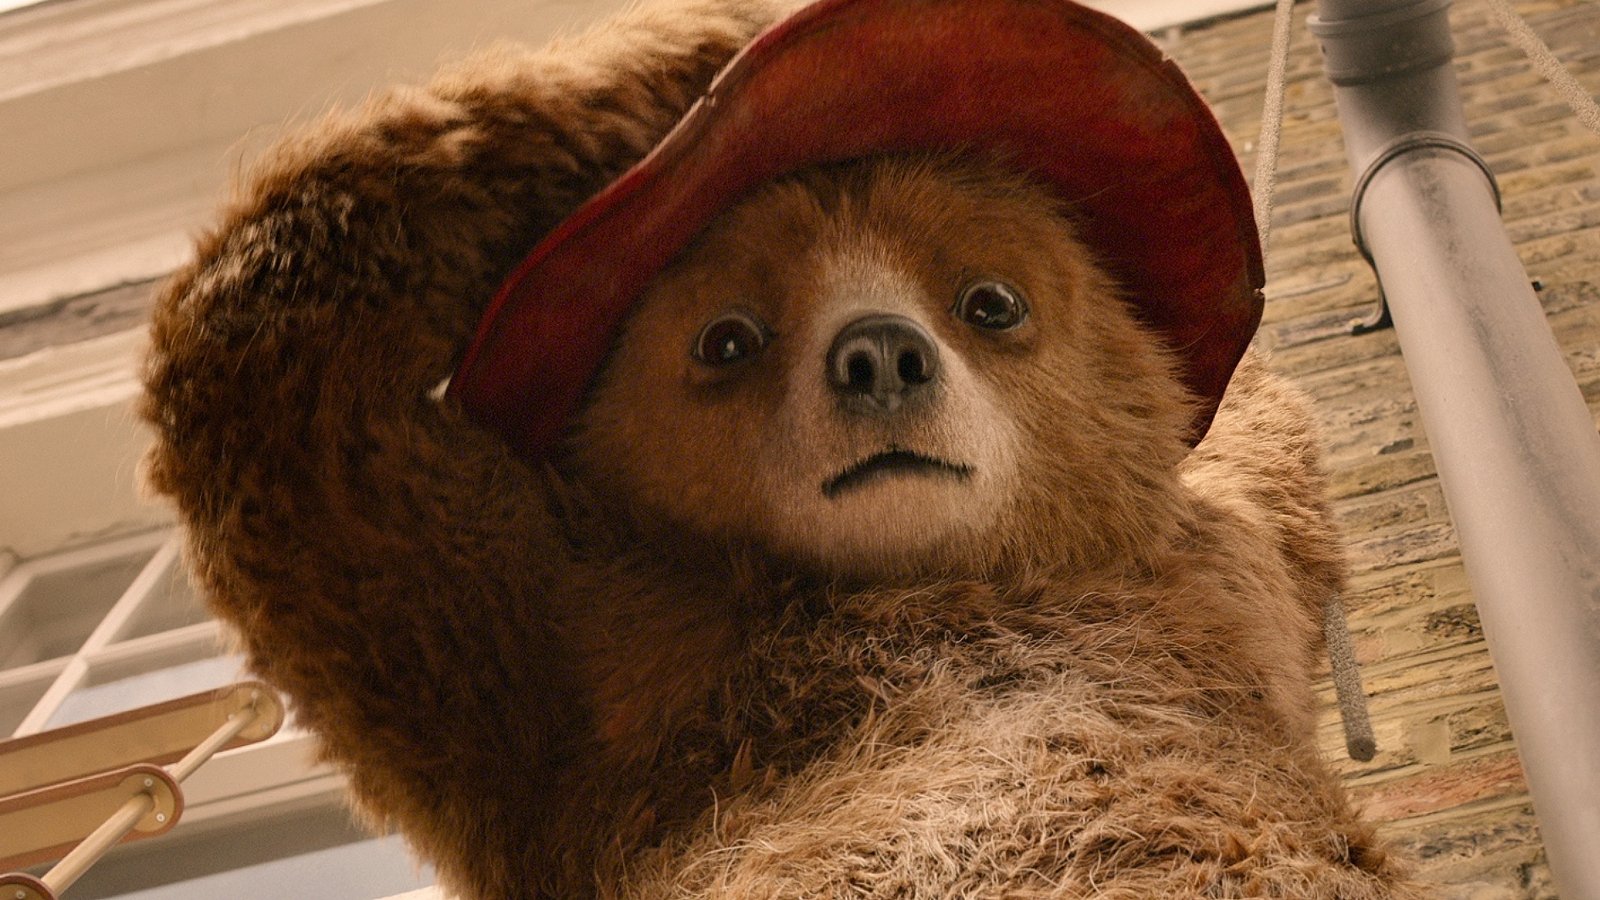 New Paddington Bear Experience to open at London's County Hall in late 2023